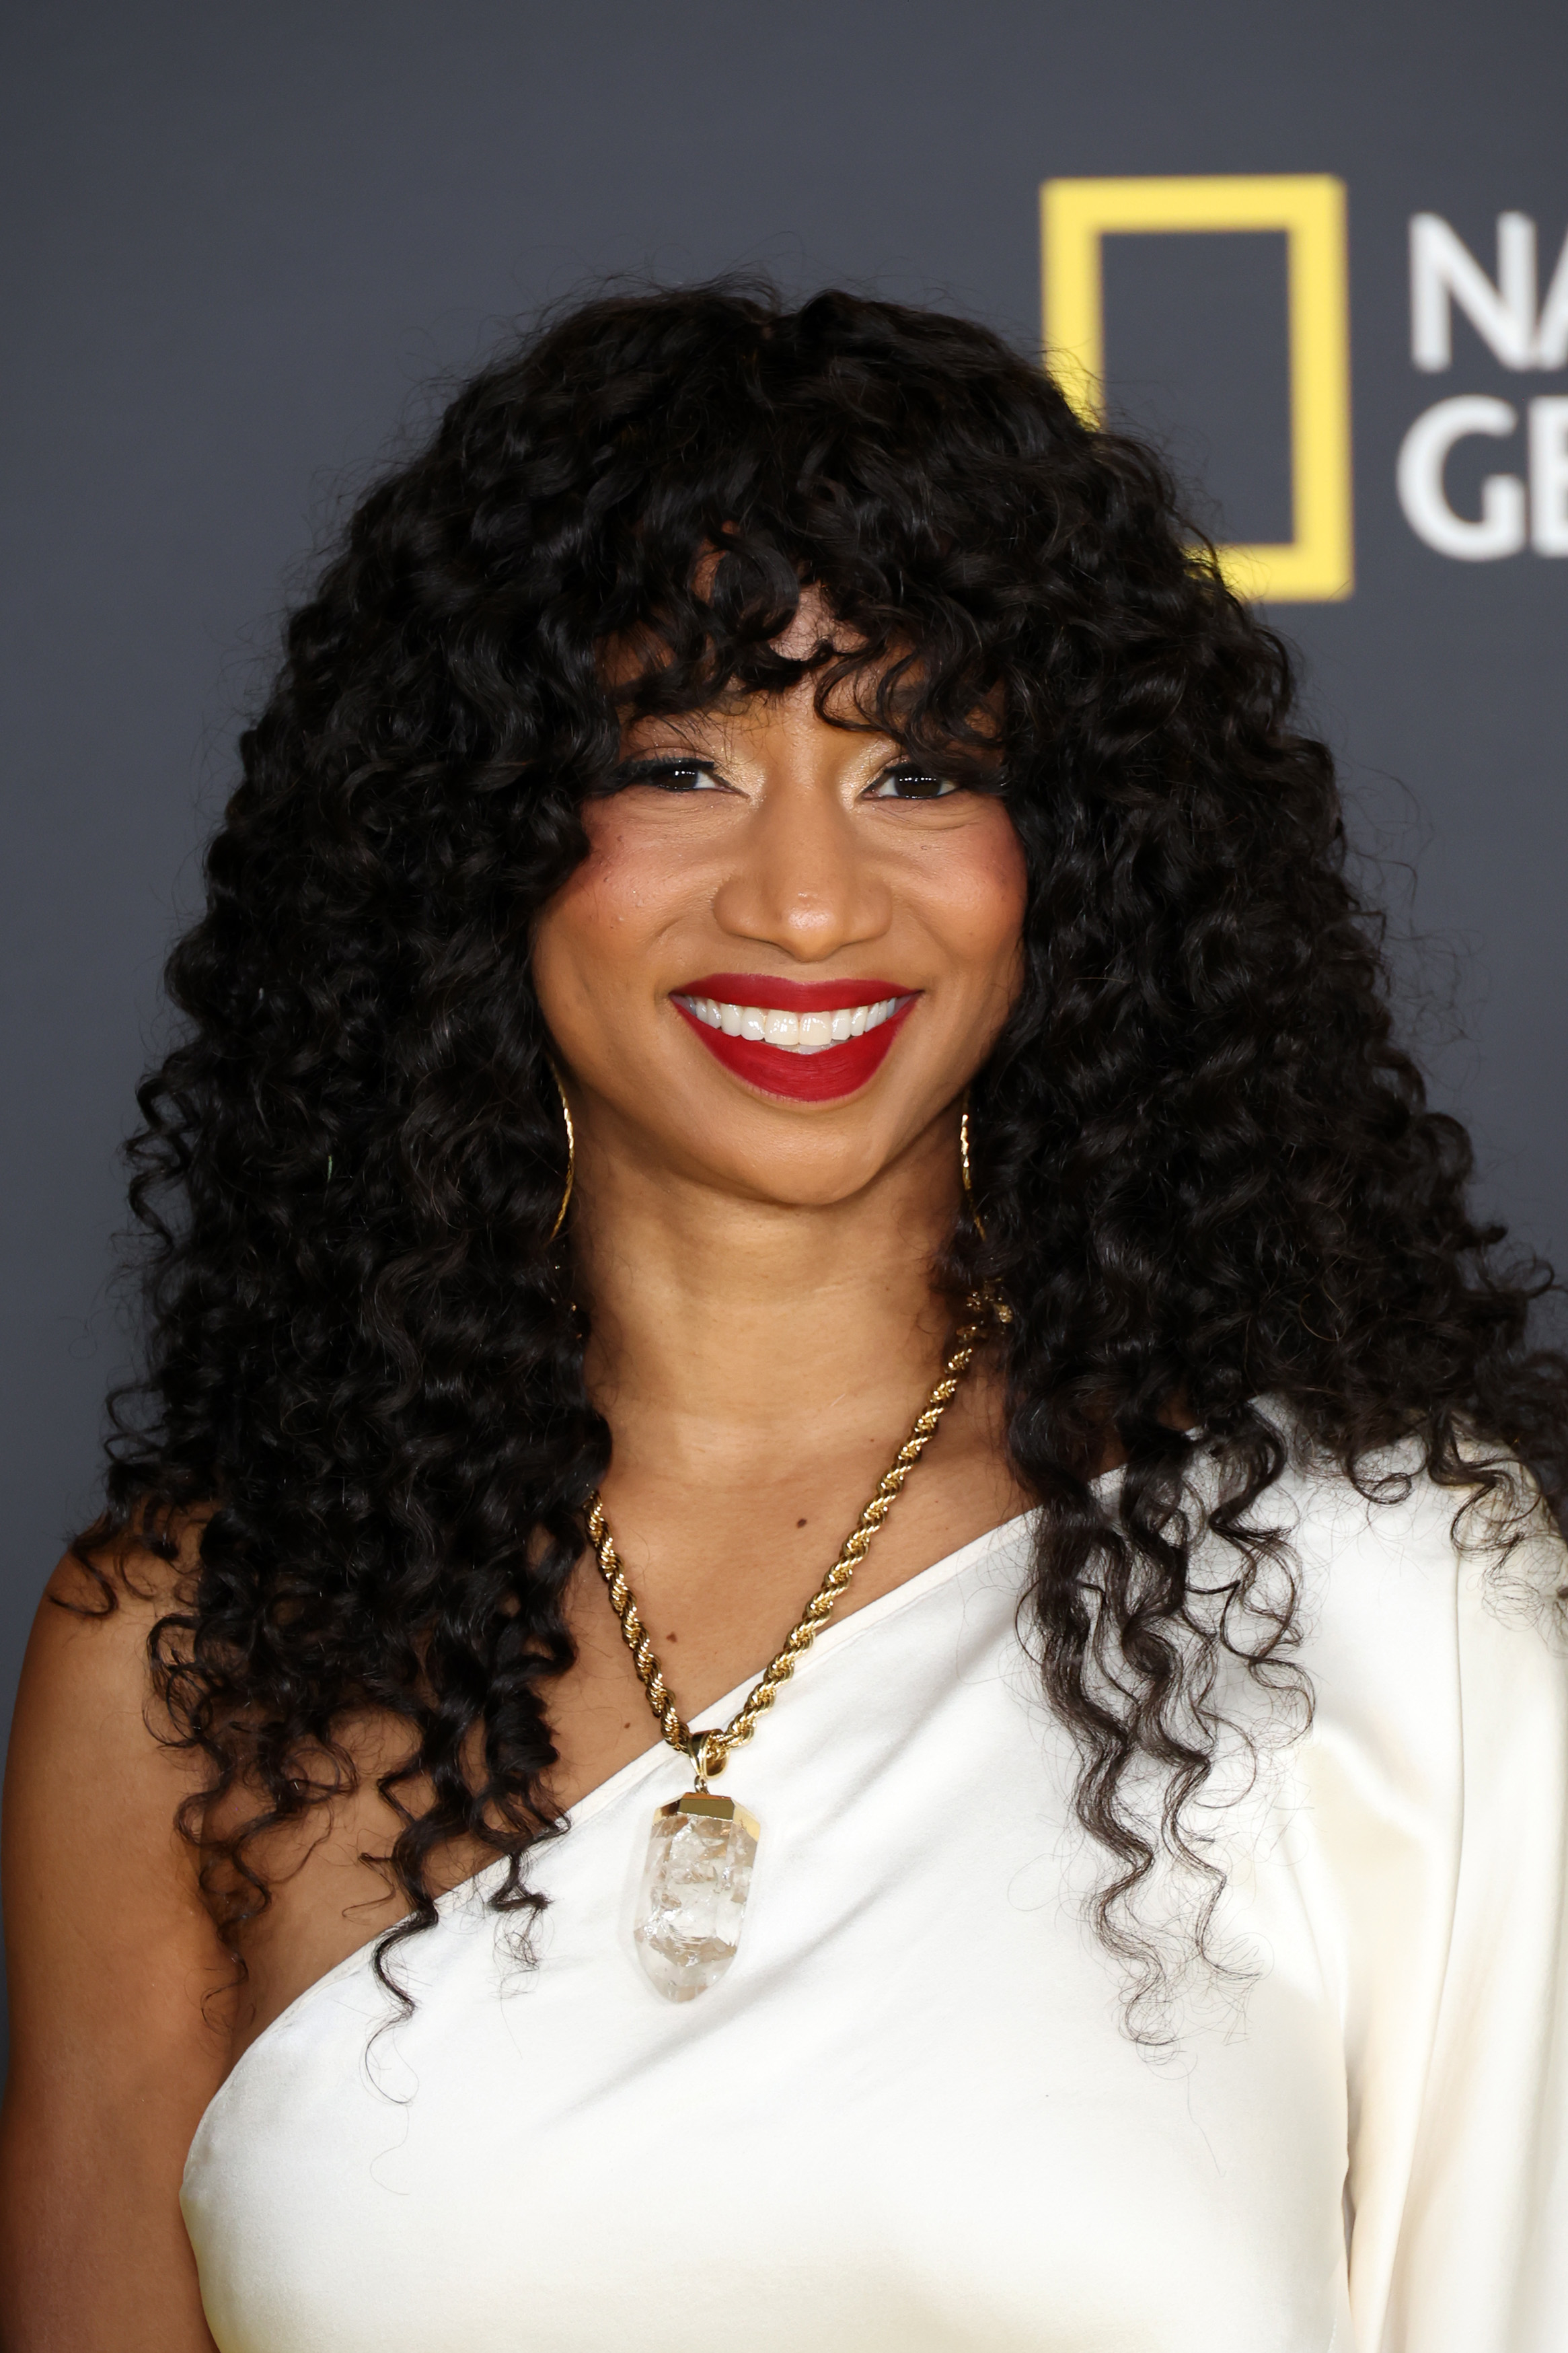 Smiling person on red carpet in white top with gold necklace, curly hair, and red lipstick